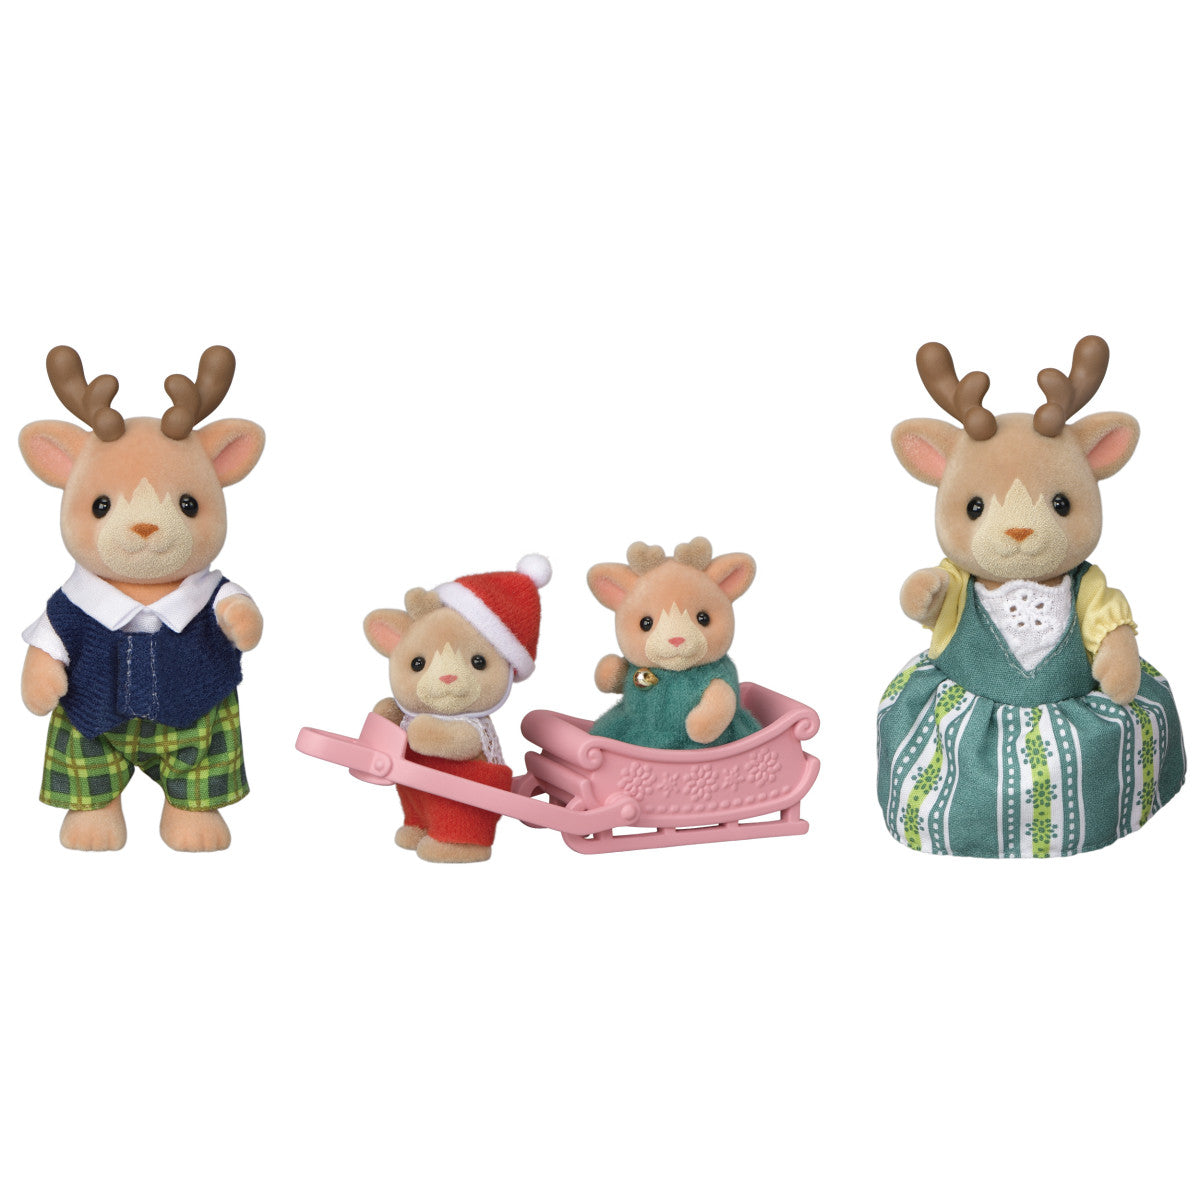 Calico Critters - Reindeer Family